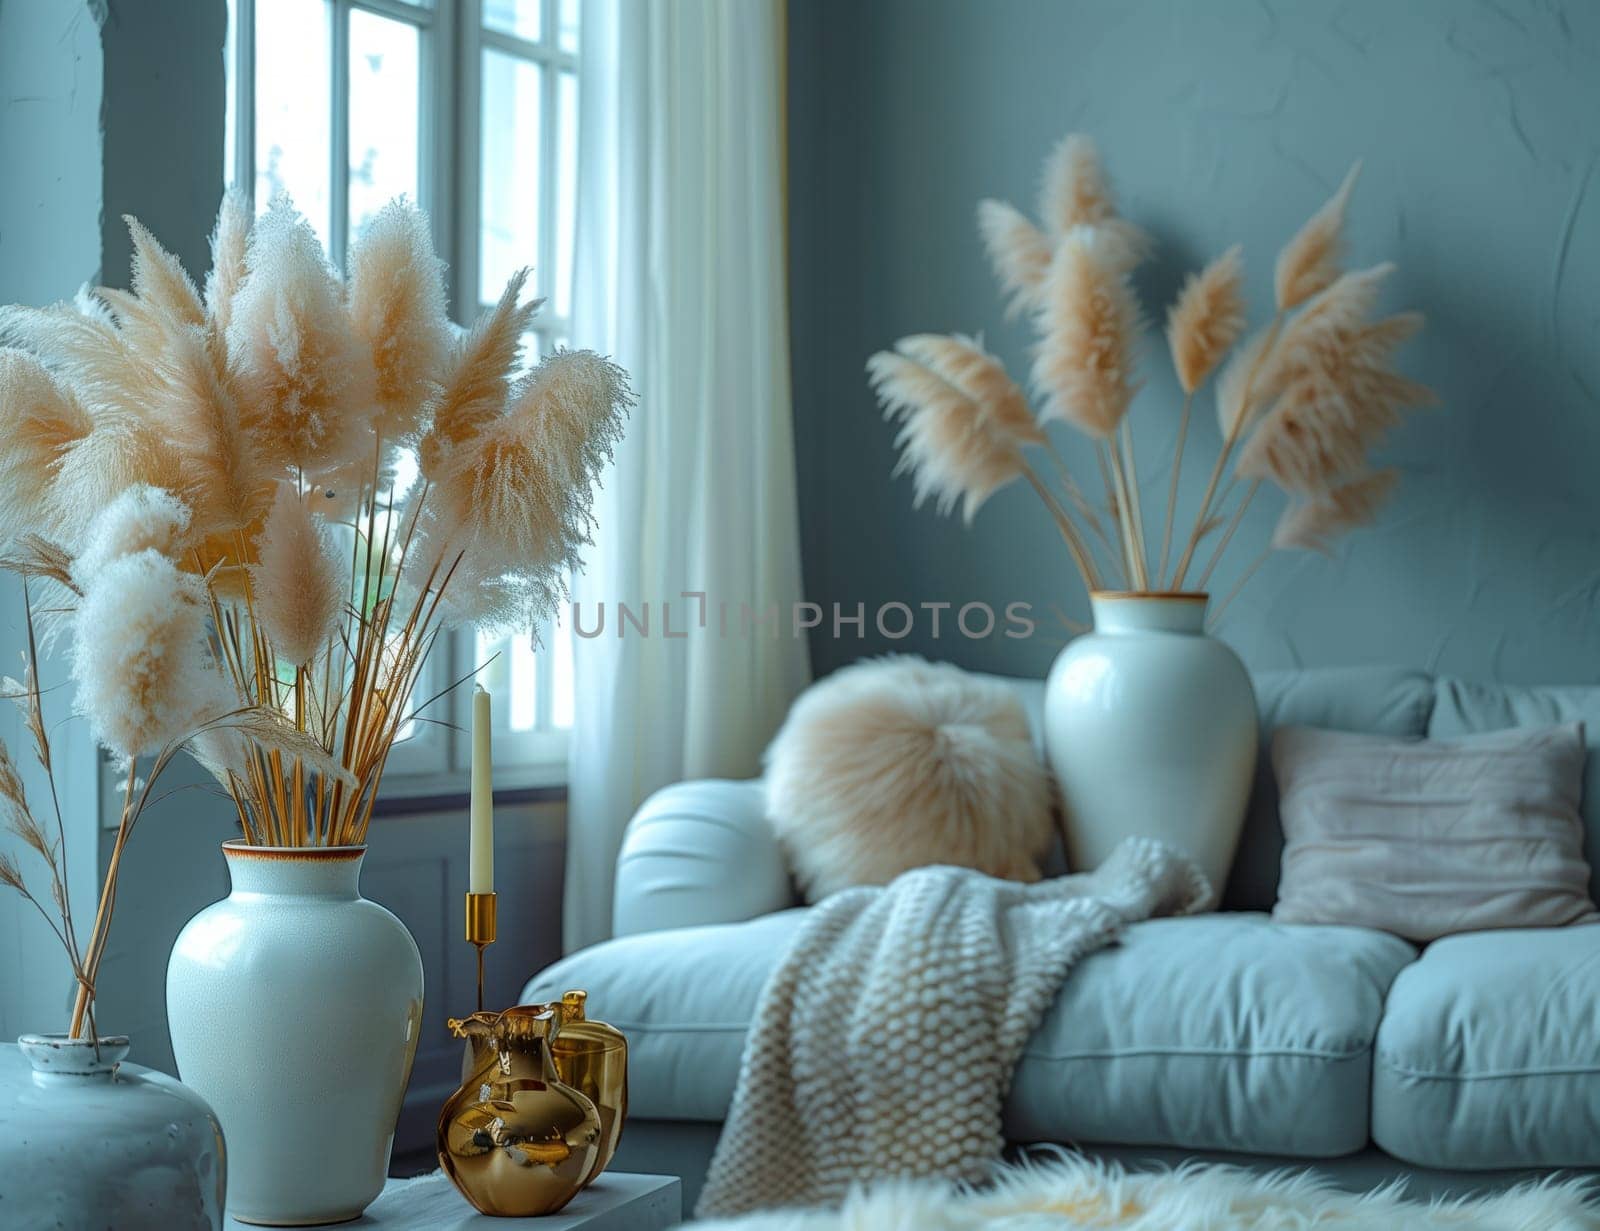 An interior design of a living room in a building featuring a couch, vases, pampas grass, and a window with azure textile. Perfect for a photograph backdrop